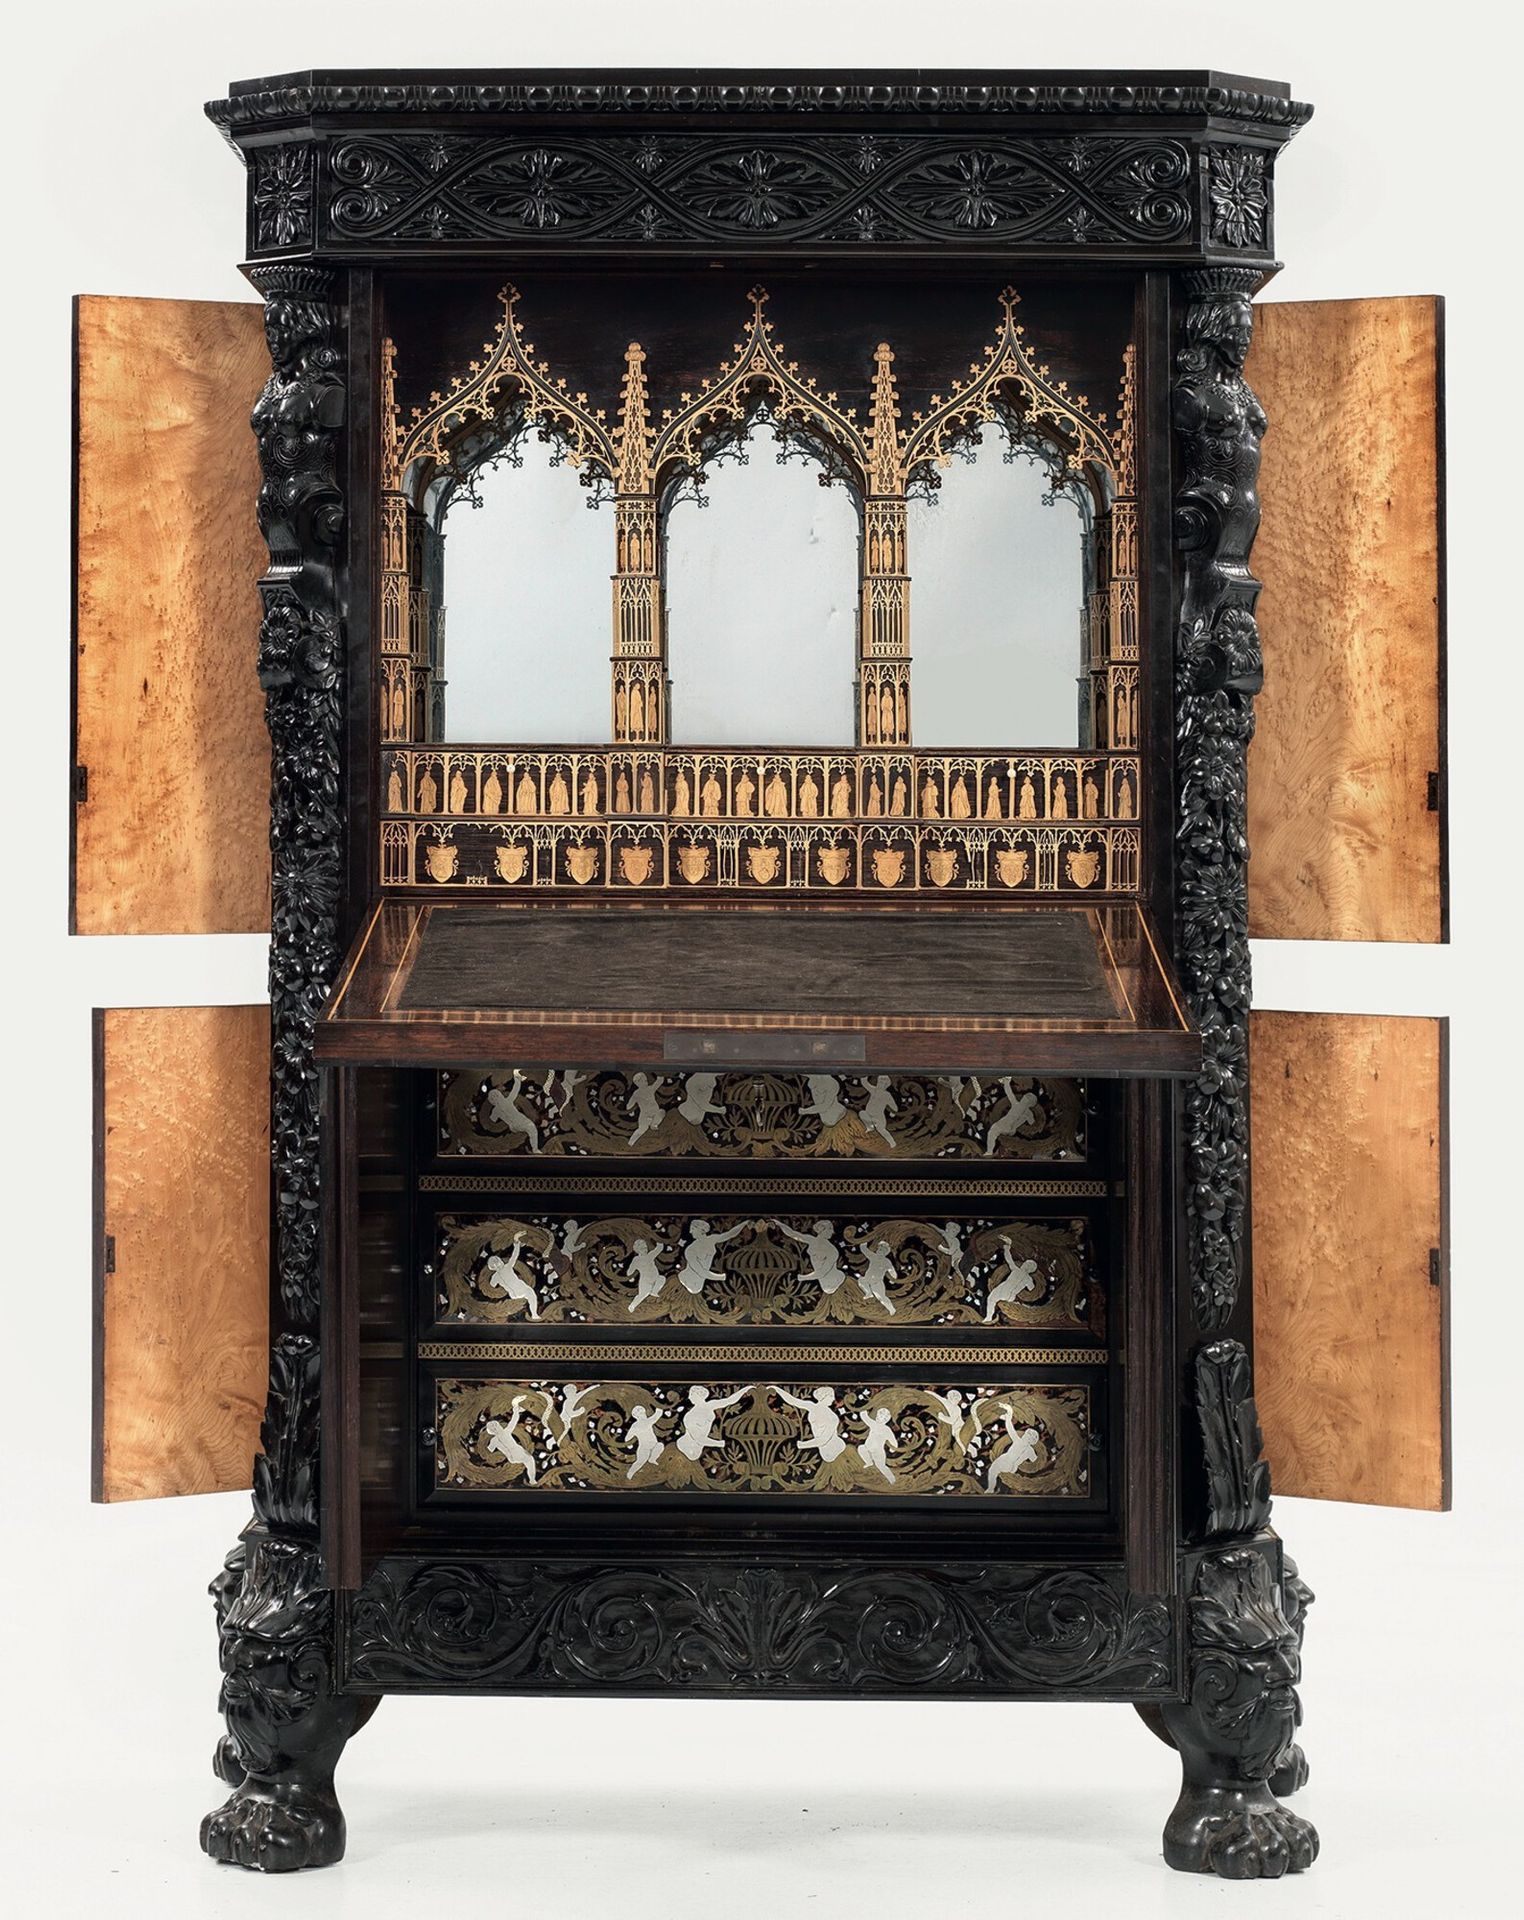 An exceptional Gothic Revival ebony and rosewood cabinet, unknown workshop in th&hellip;